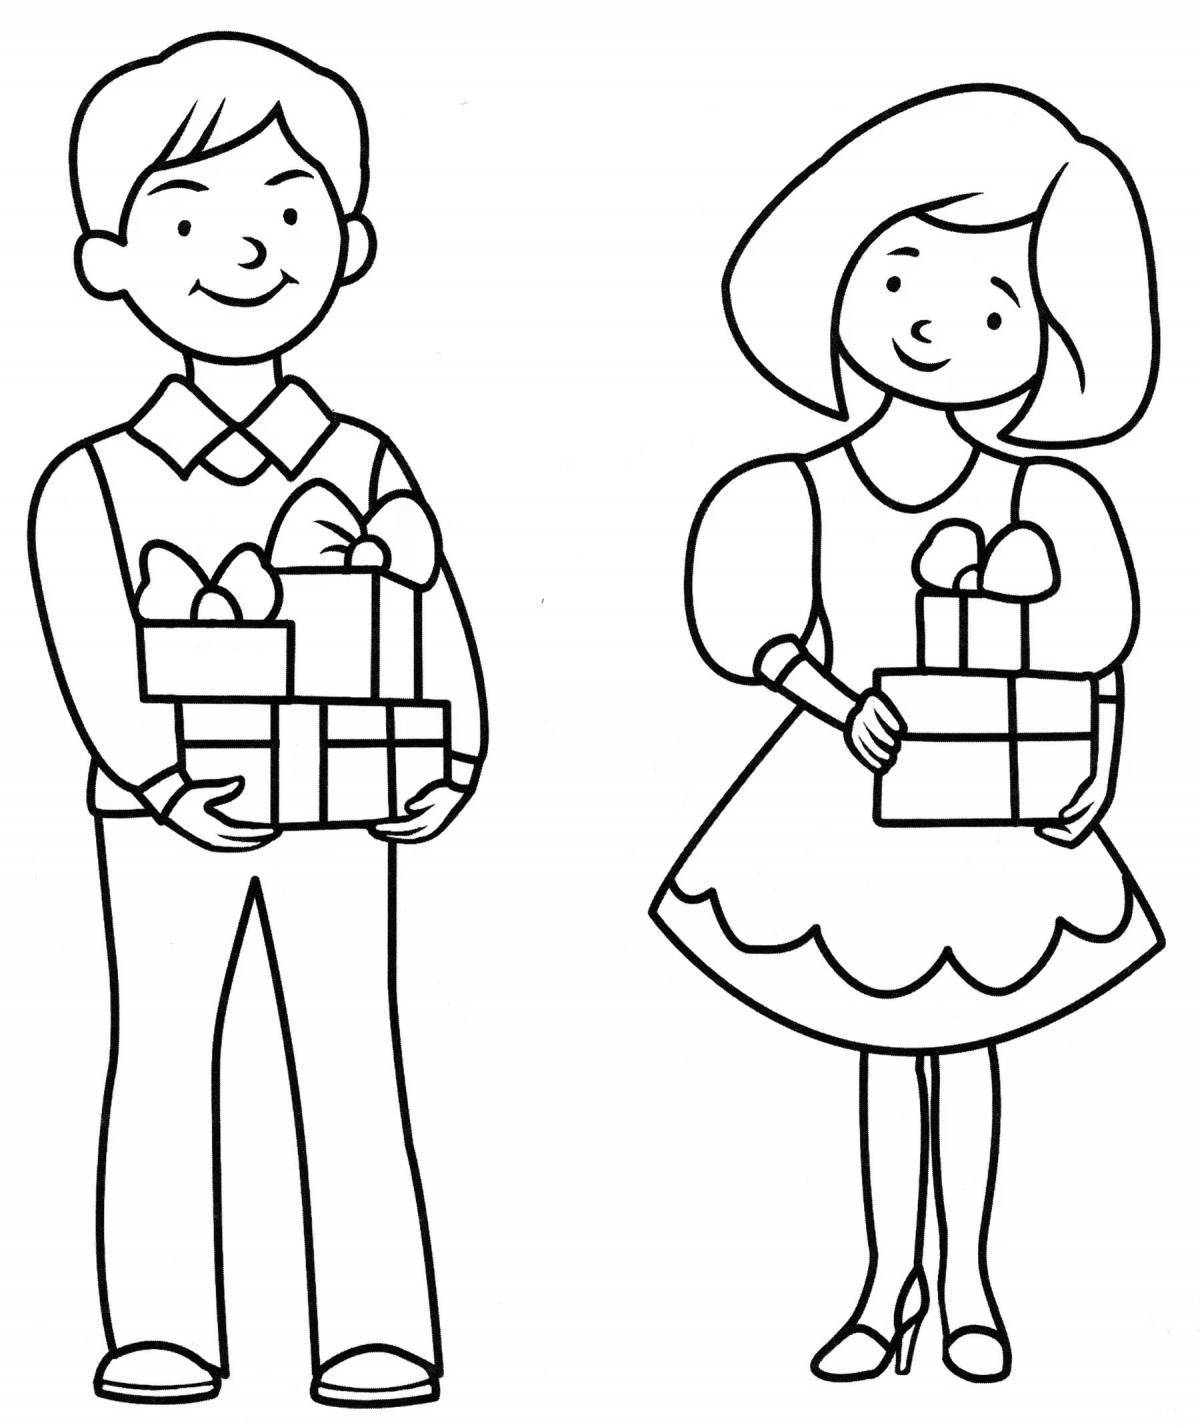 Fun coloring book mom and dad for kids